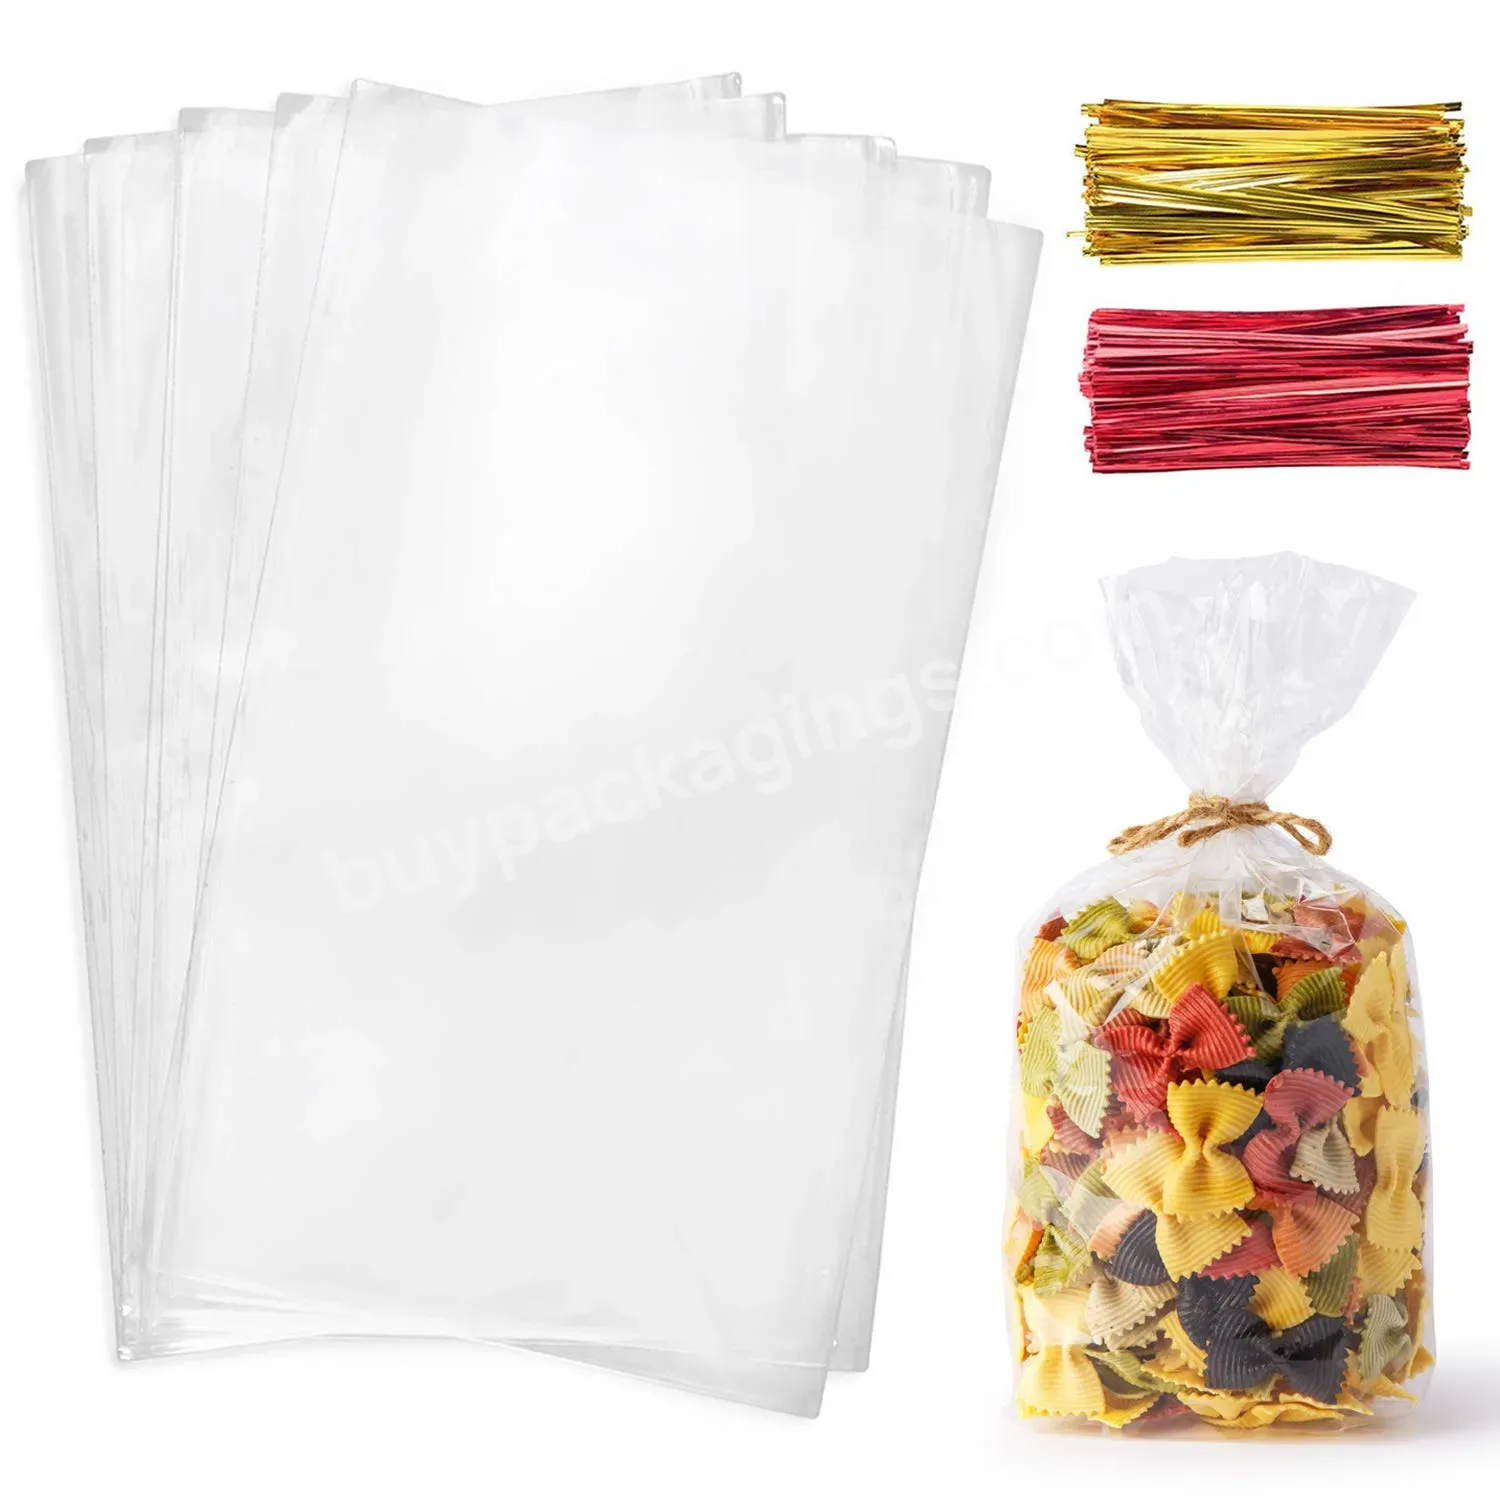 Opp Block Bottom Plastic Packaging Cellophane Bags For Christmas Gift Candy Food Chocolate Biscuits With Card Bottom